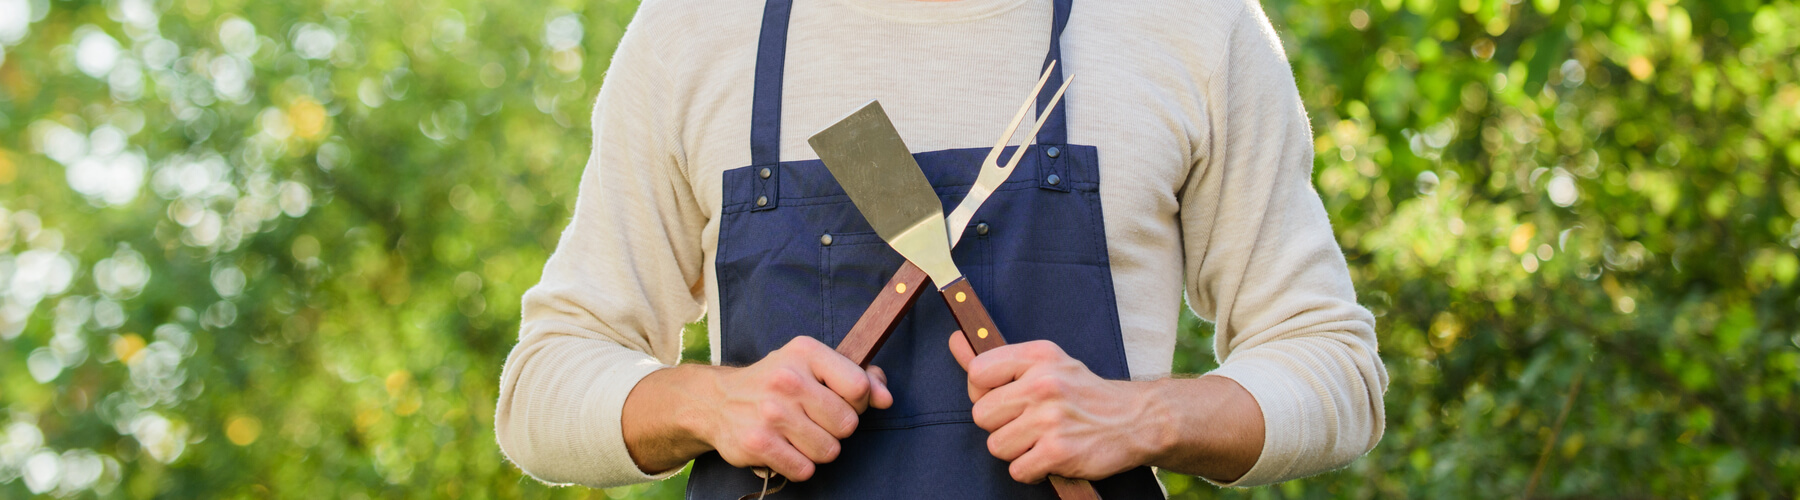 cook off concept, man wearing grilling or cooking apron holding utensils in a cross across chest, challenge